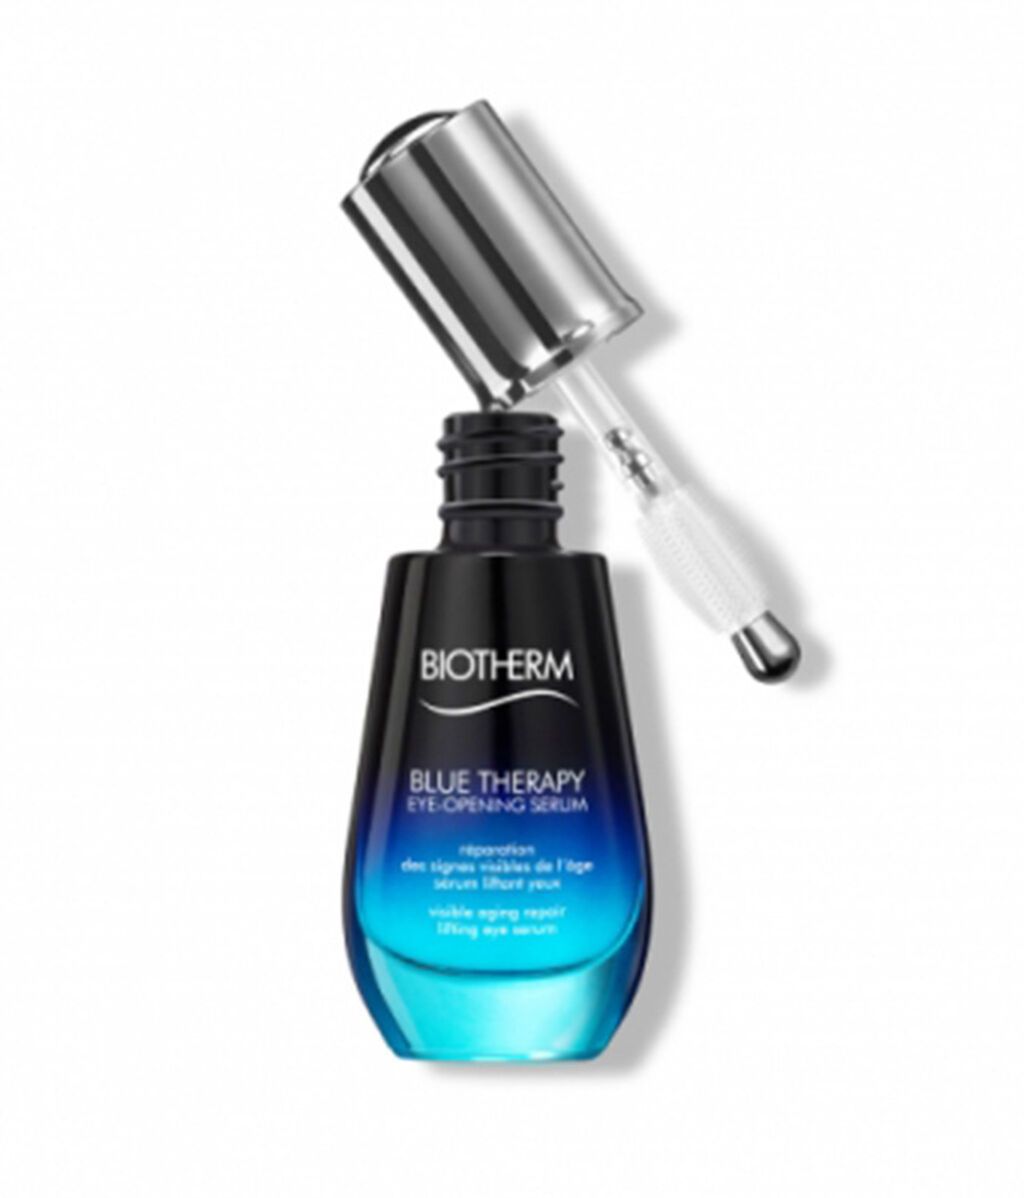 Blue Therapy Eye-Opening Serum, de Biotherm